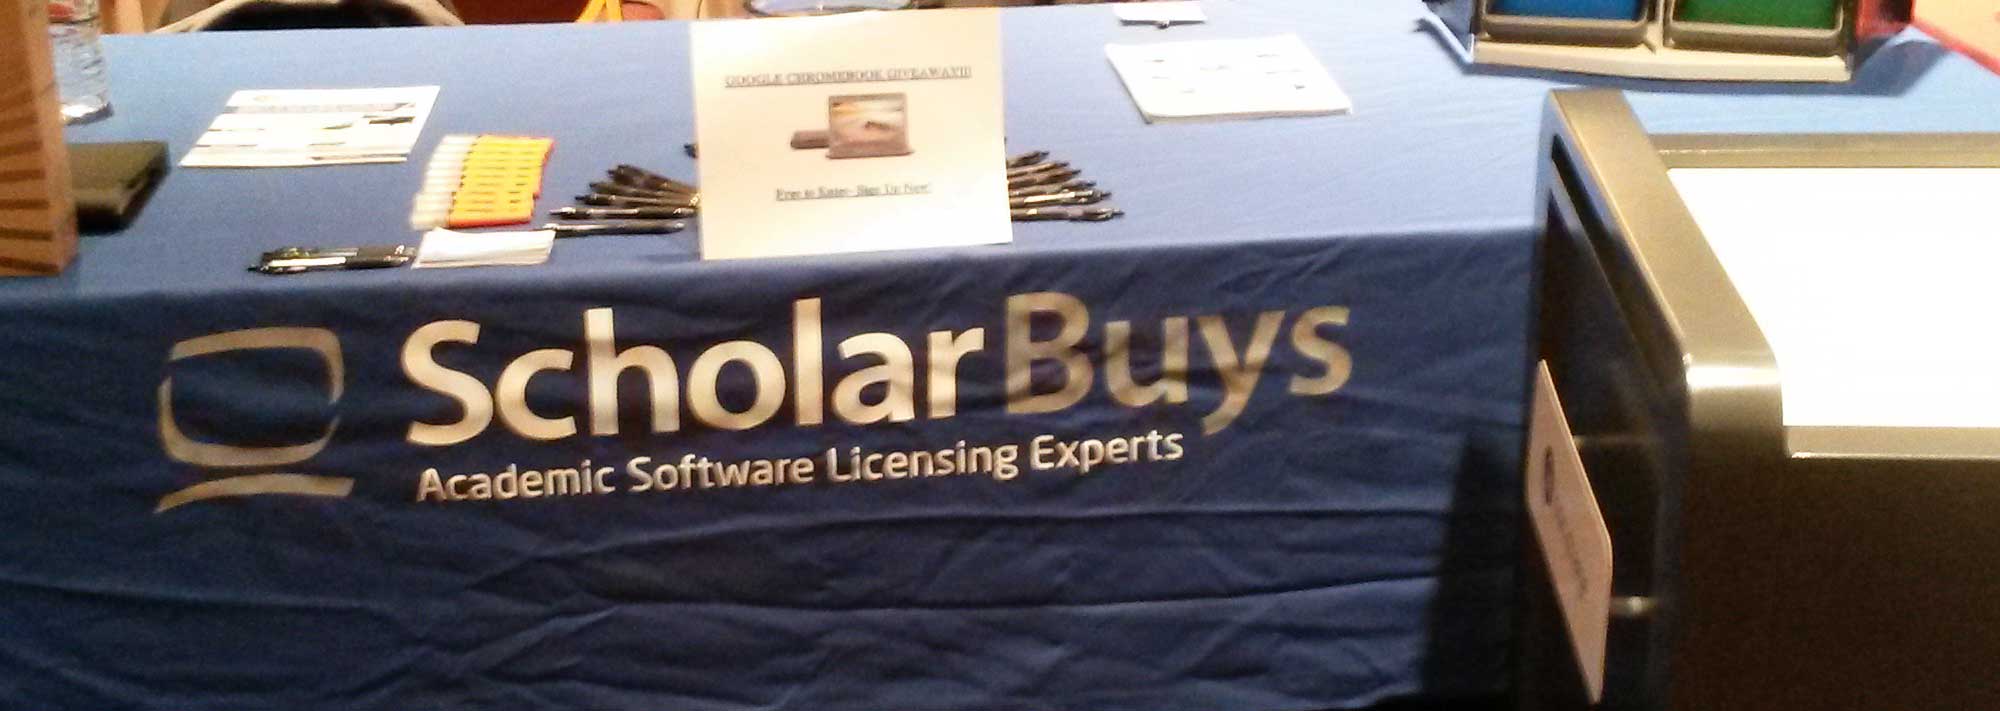 Image of ScholarBuys booth at WCRIS Leadership Conference